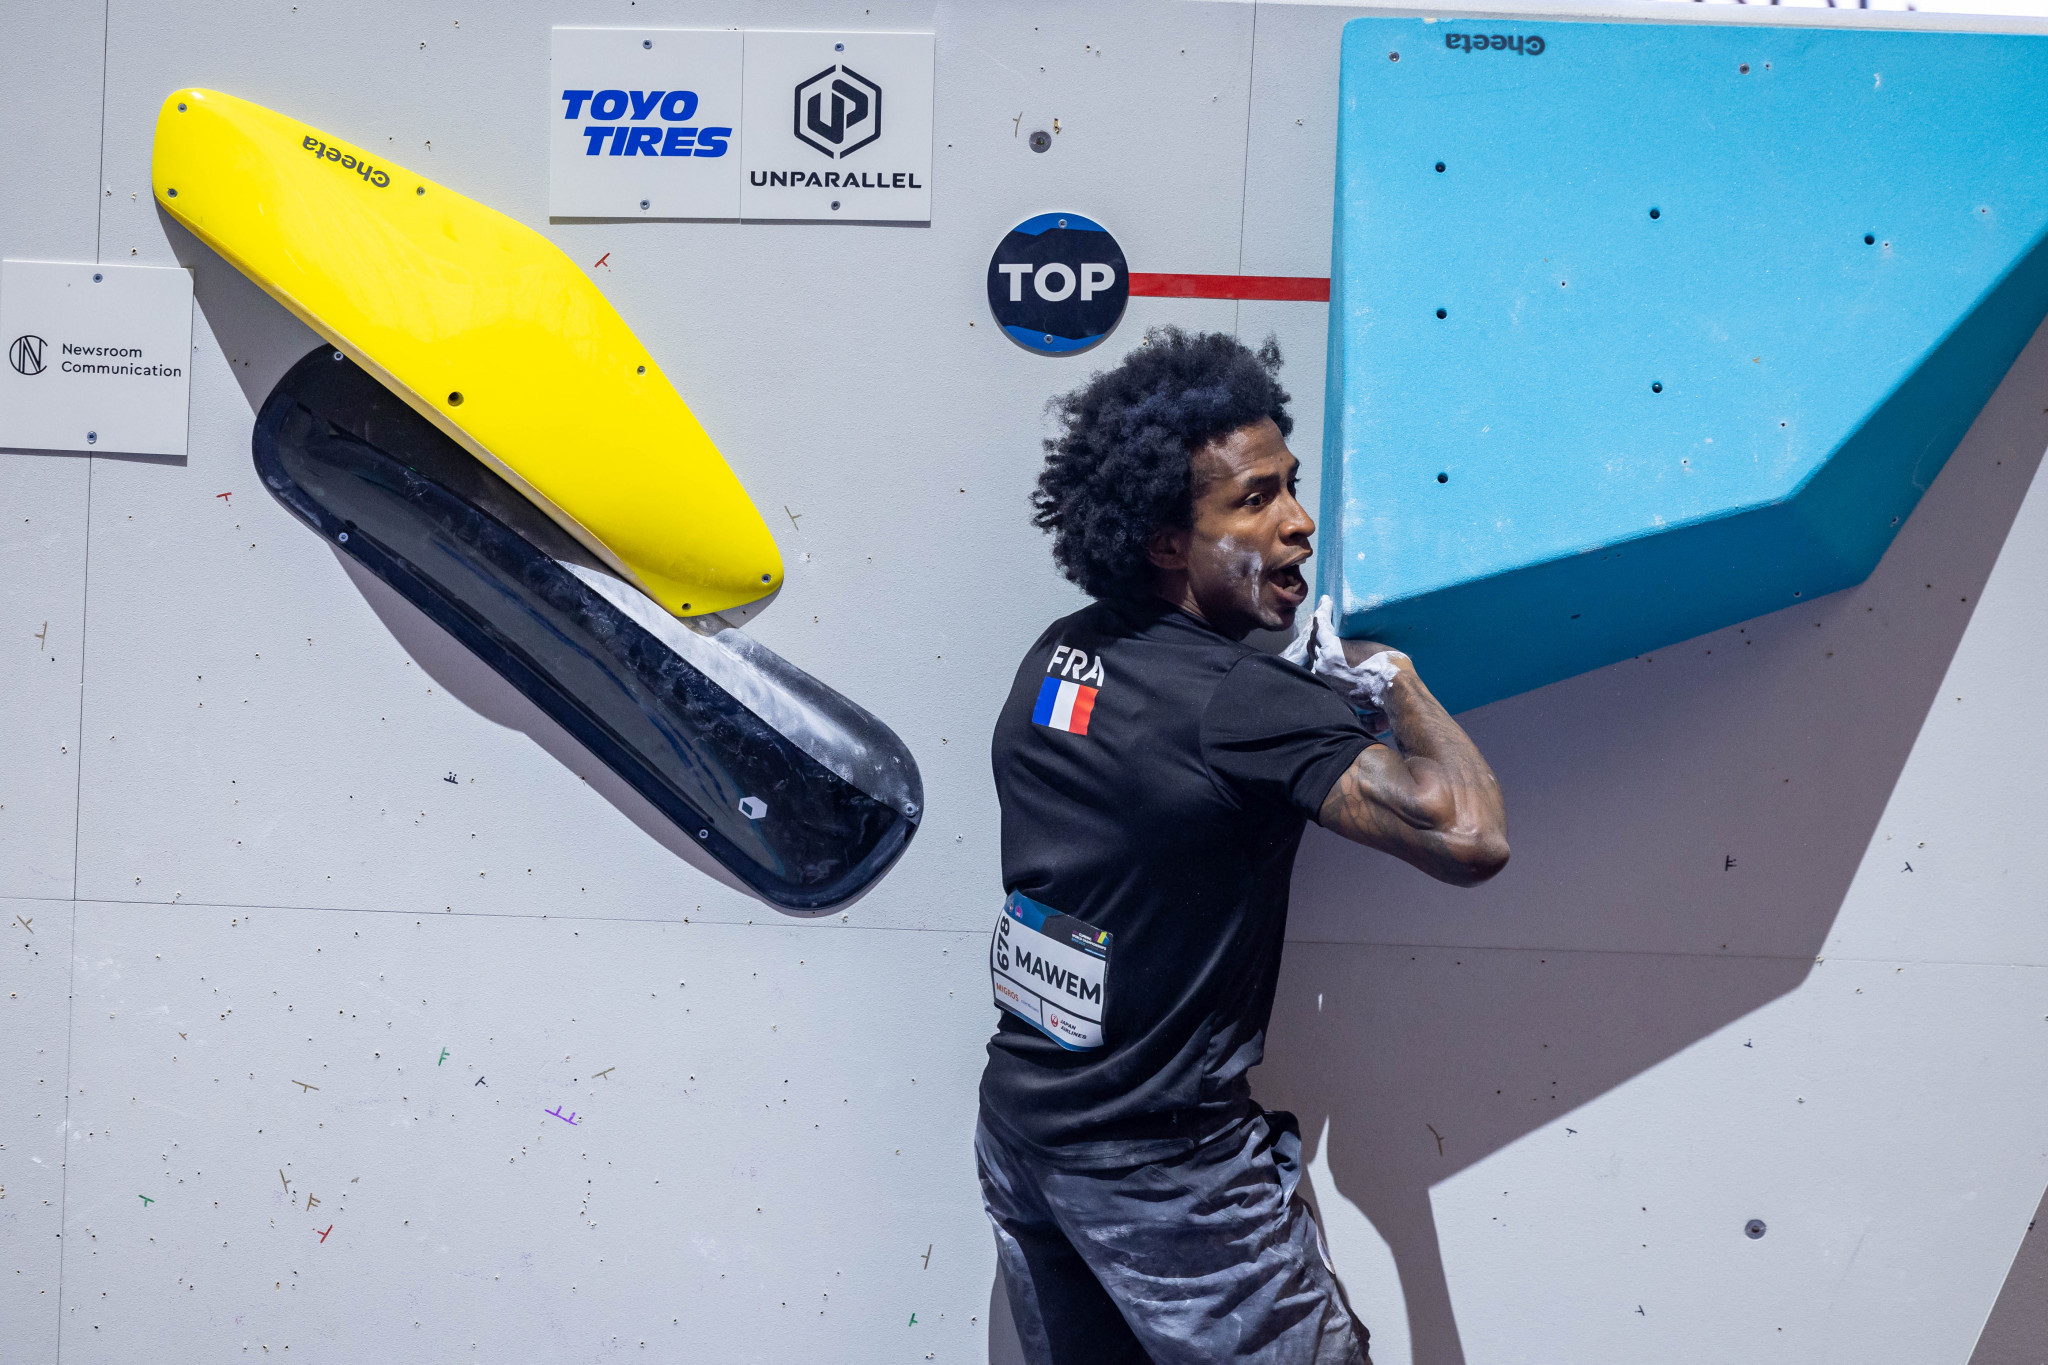 Mawem becomes first Frenchman to win boulder gold medal at IFSC World Championships